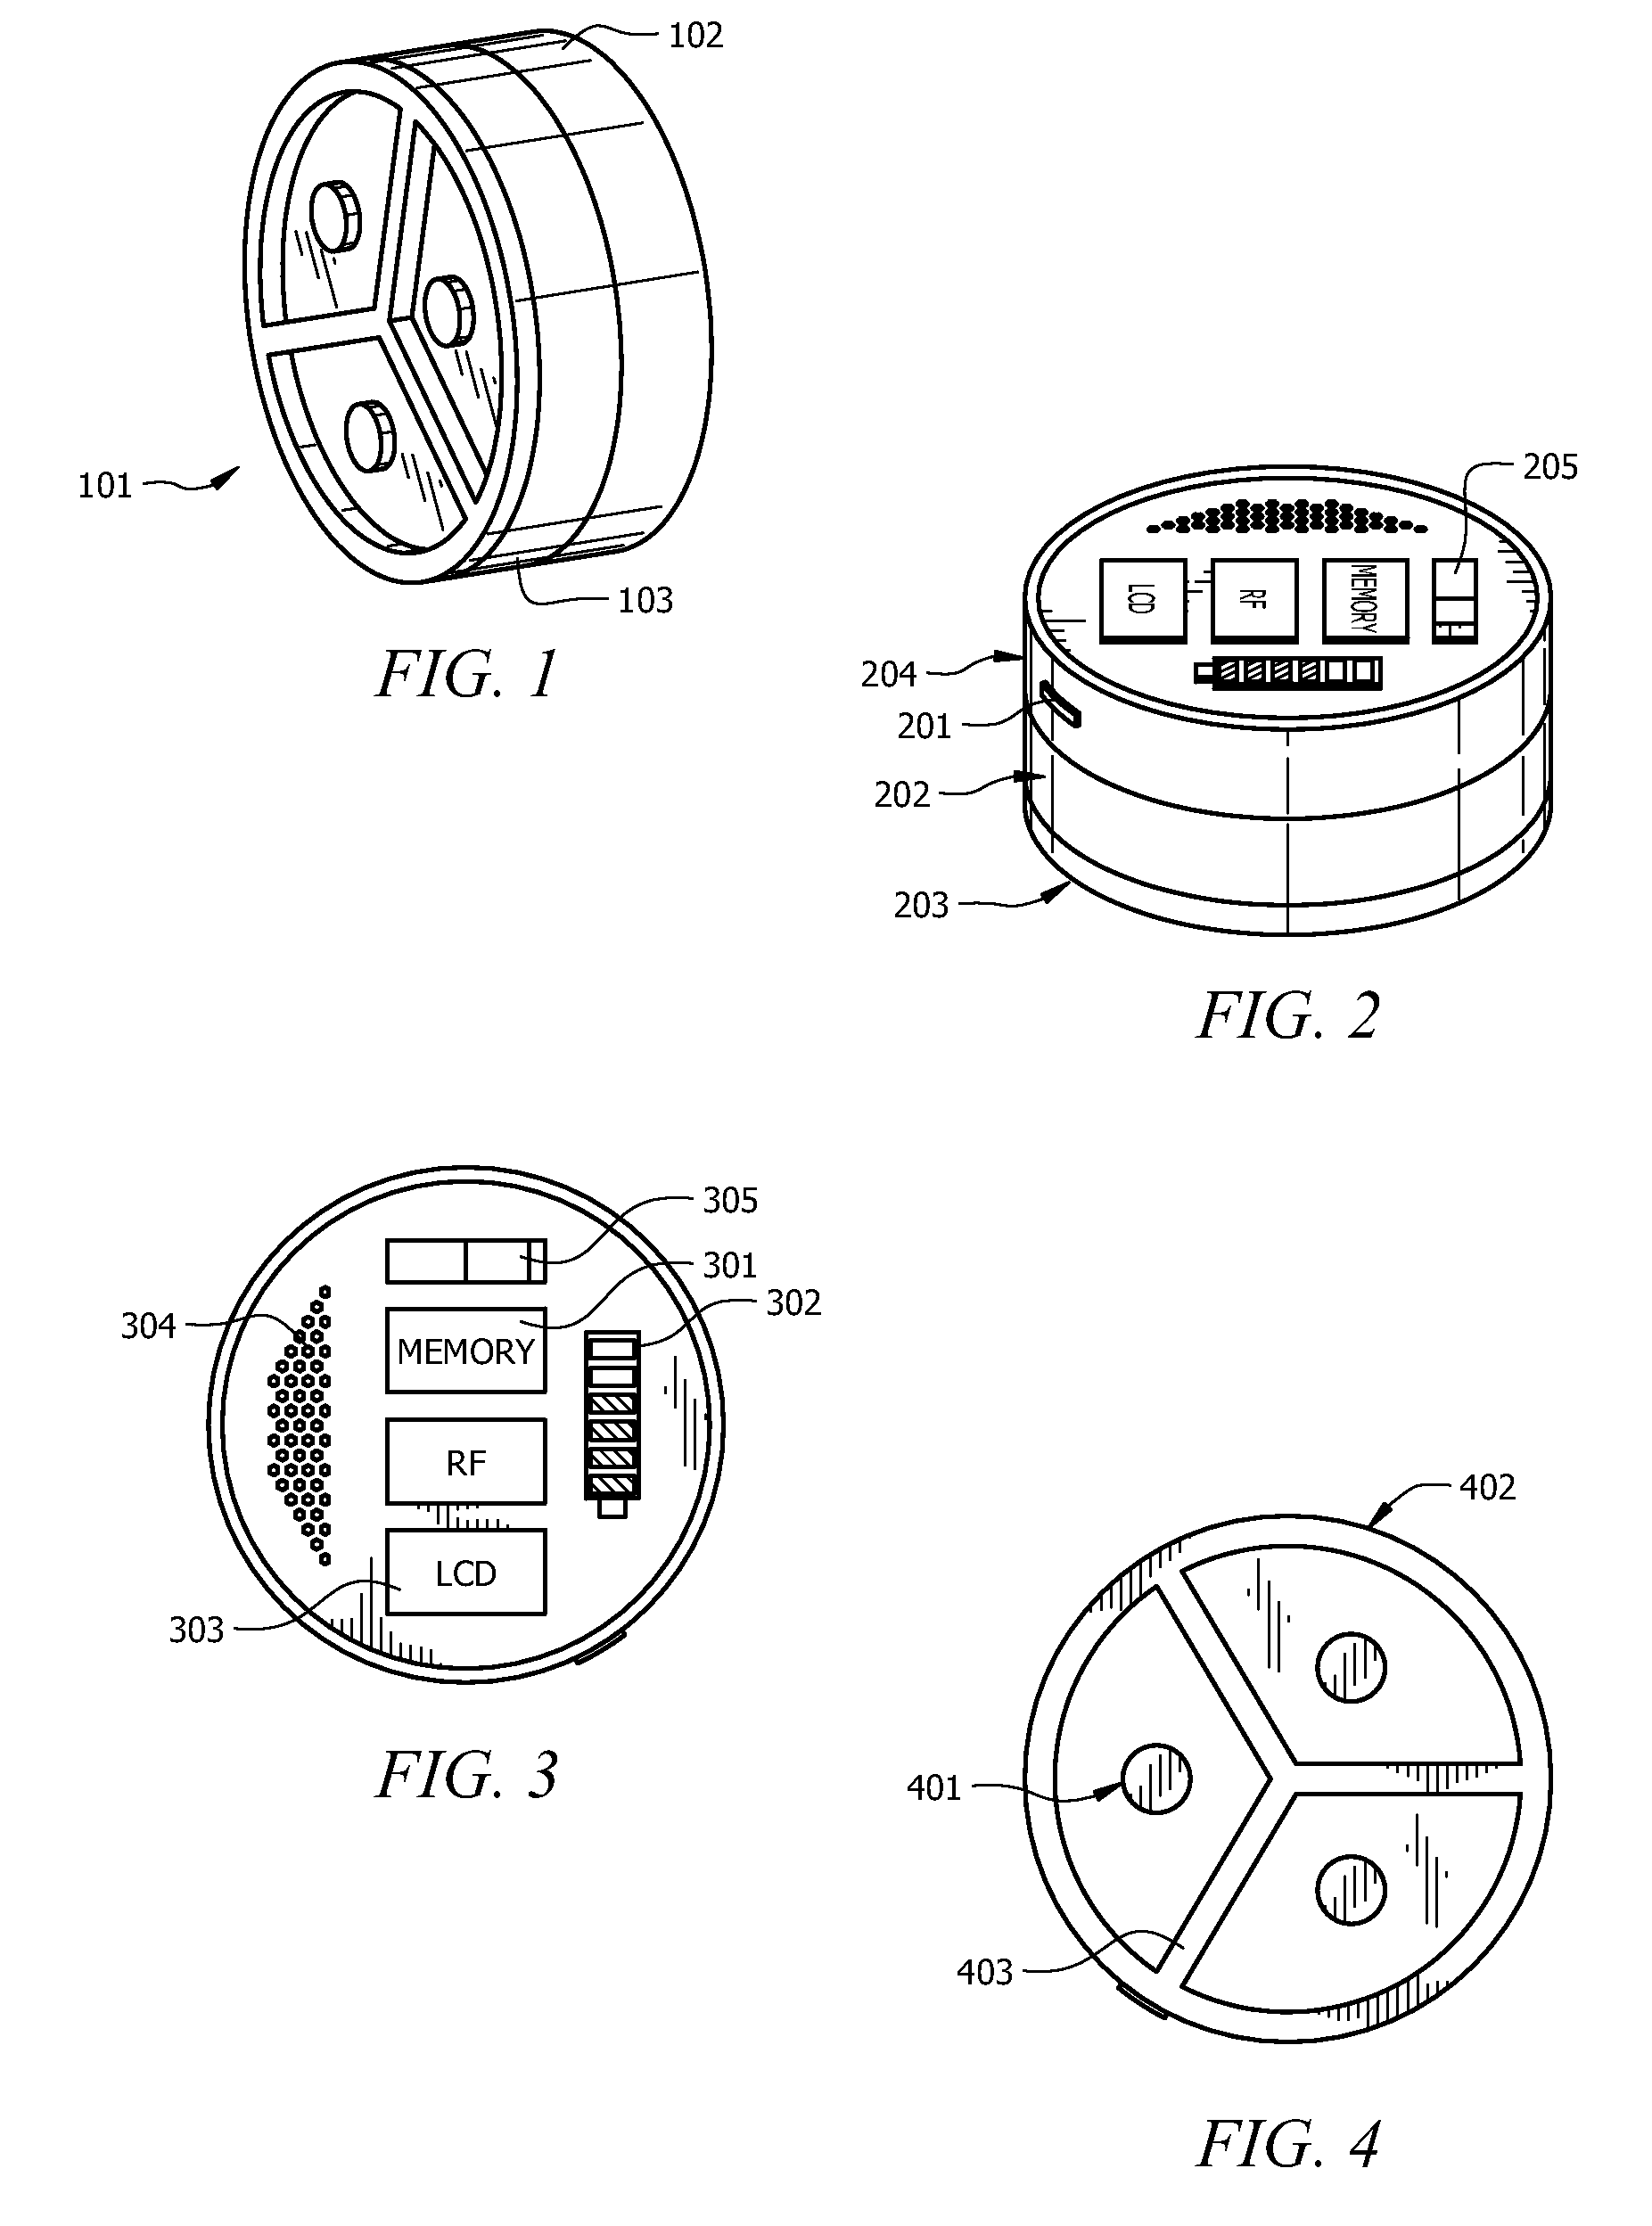 Diagnostic device for remote sensing and transmitting biophysiological signals